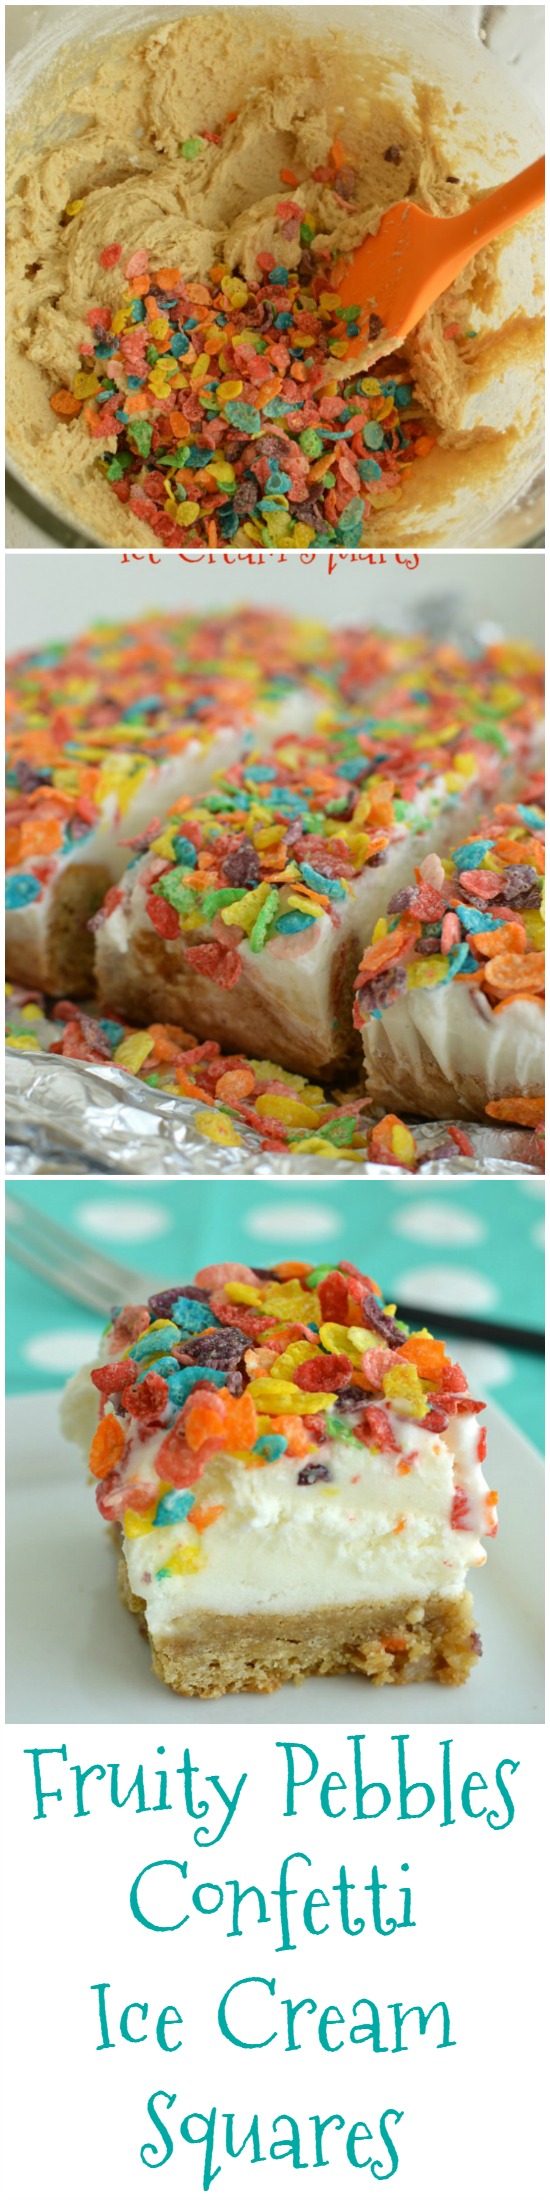 We eat ice cream almost every day in our home; we do live on a dairy after all! These Fruity Pebble Confetti Ice Cream Squares were a huge hit with my ice cream loving family! In fact, I think it’s my new favorite way to serve ice cream, no last minute ice cream scooper involved!